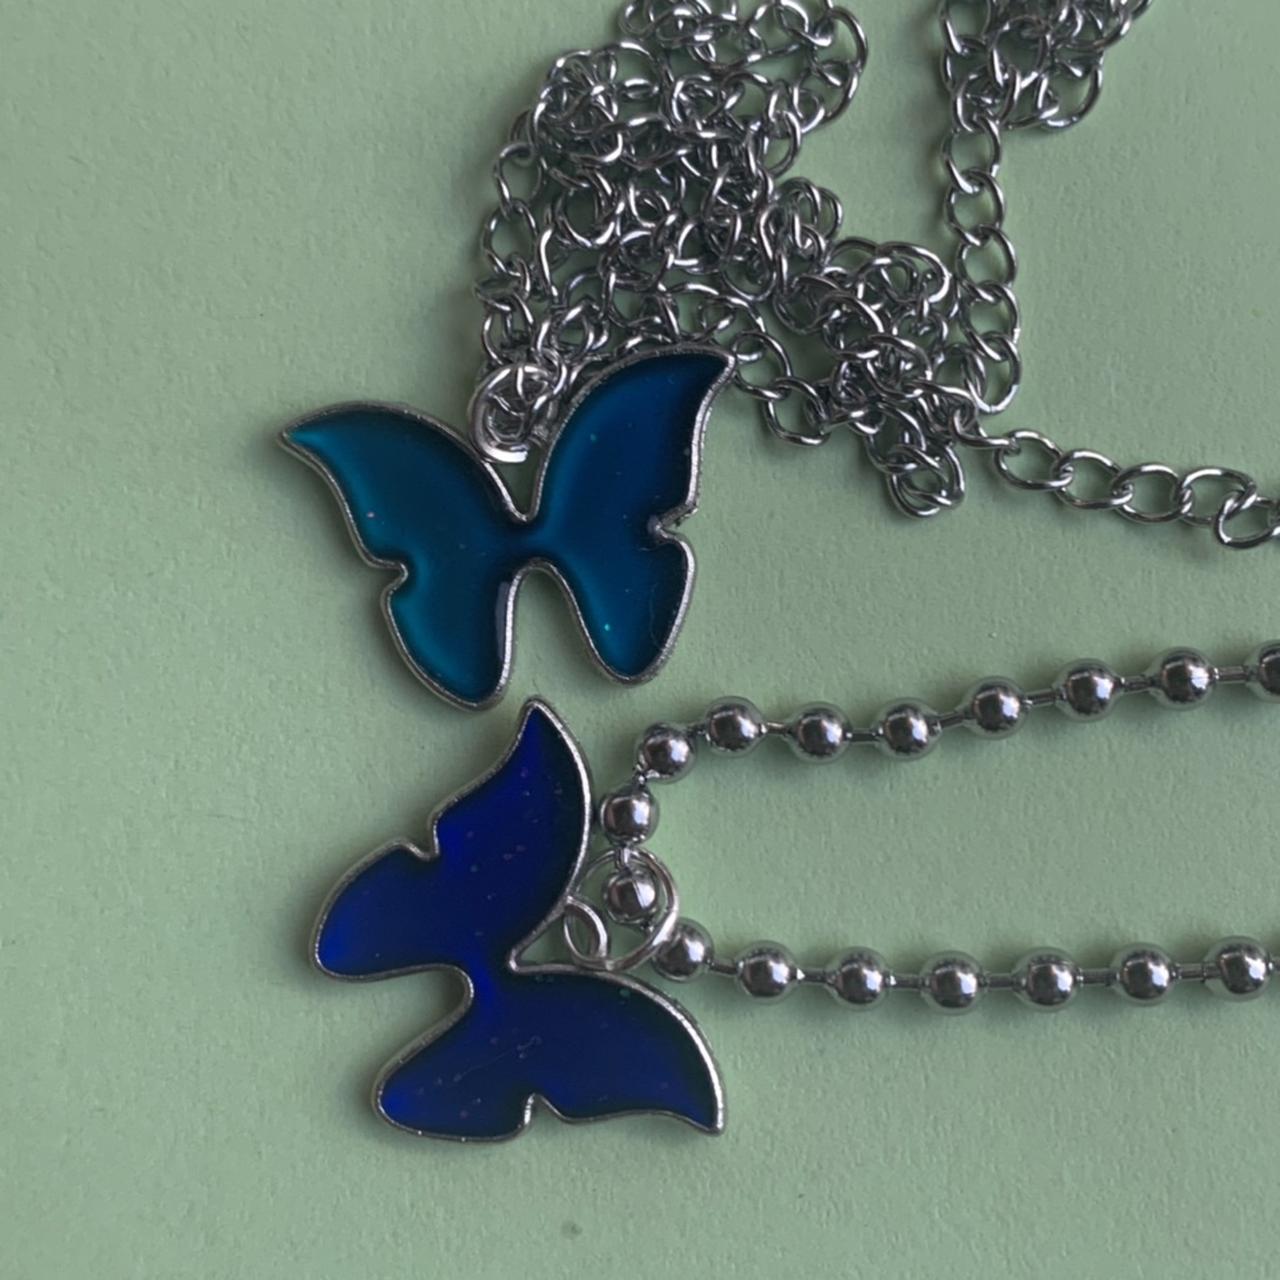 The Mood changing butterfly necklace